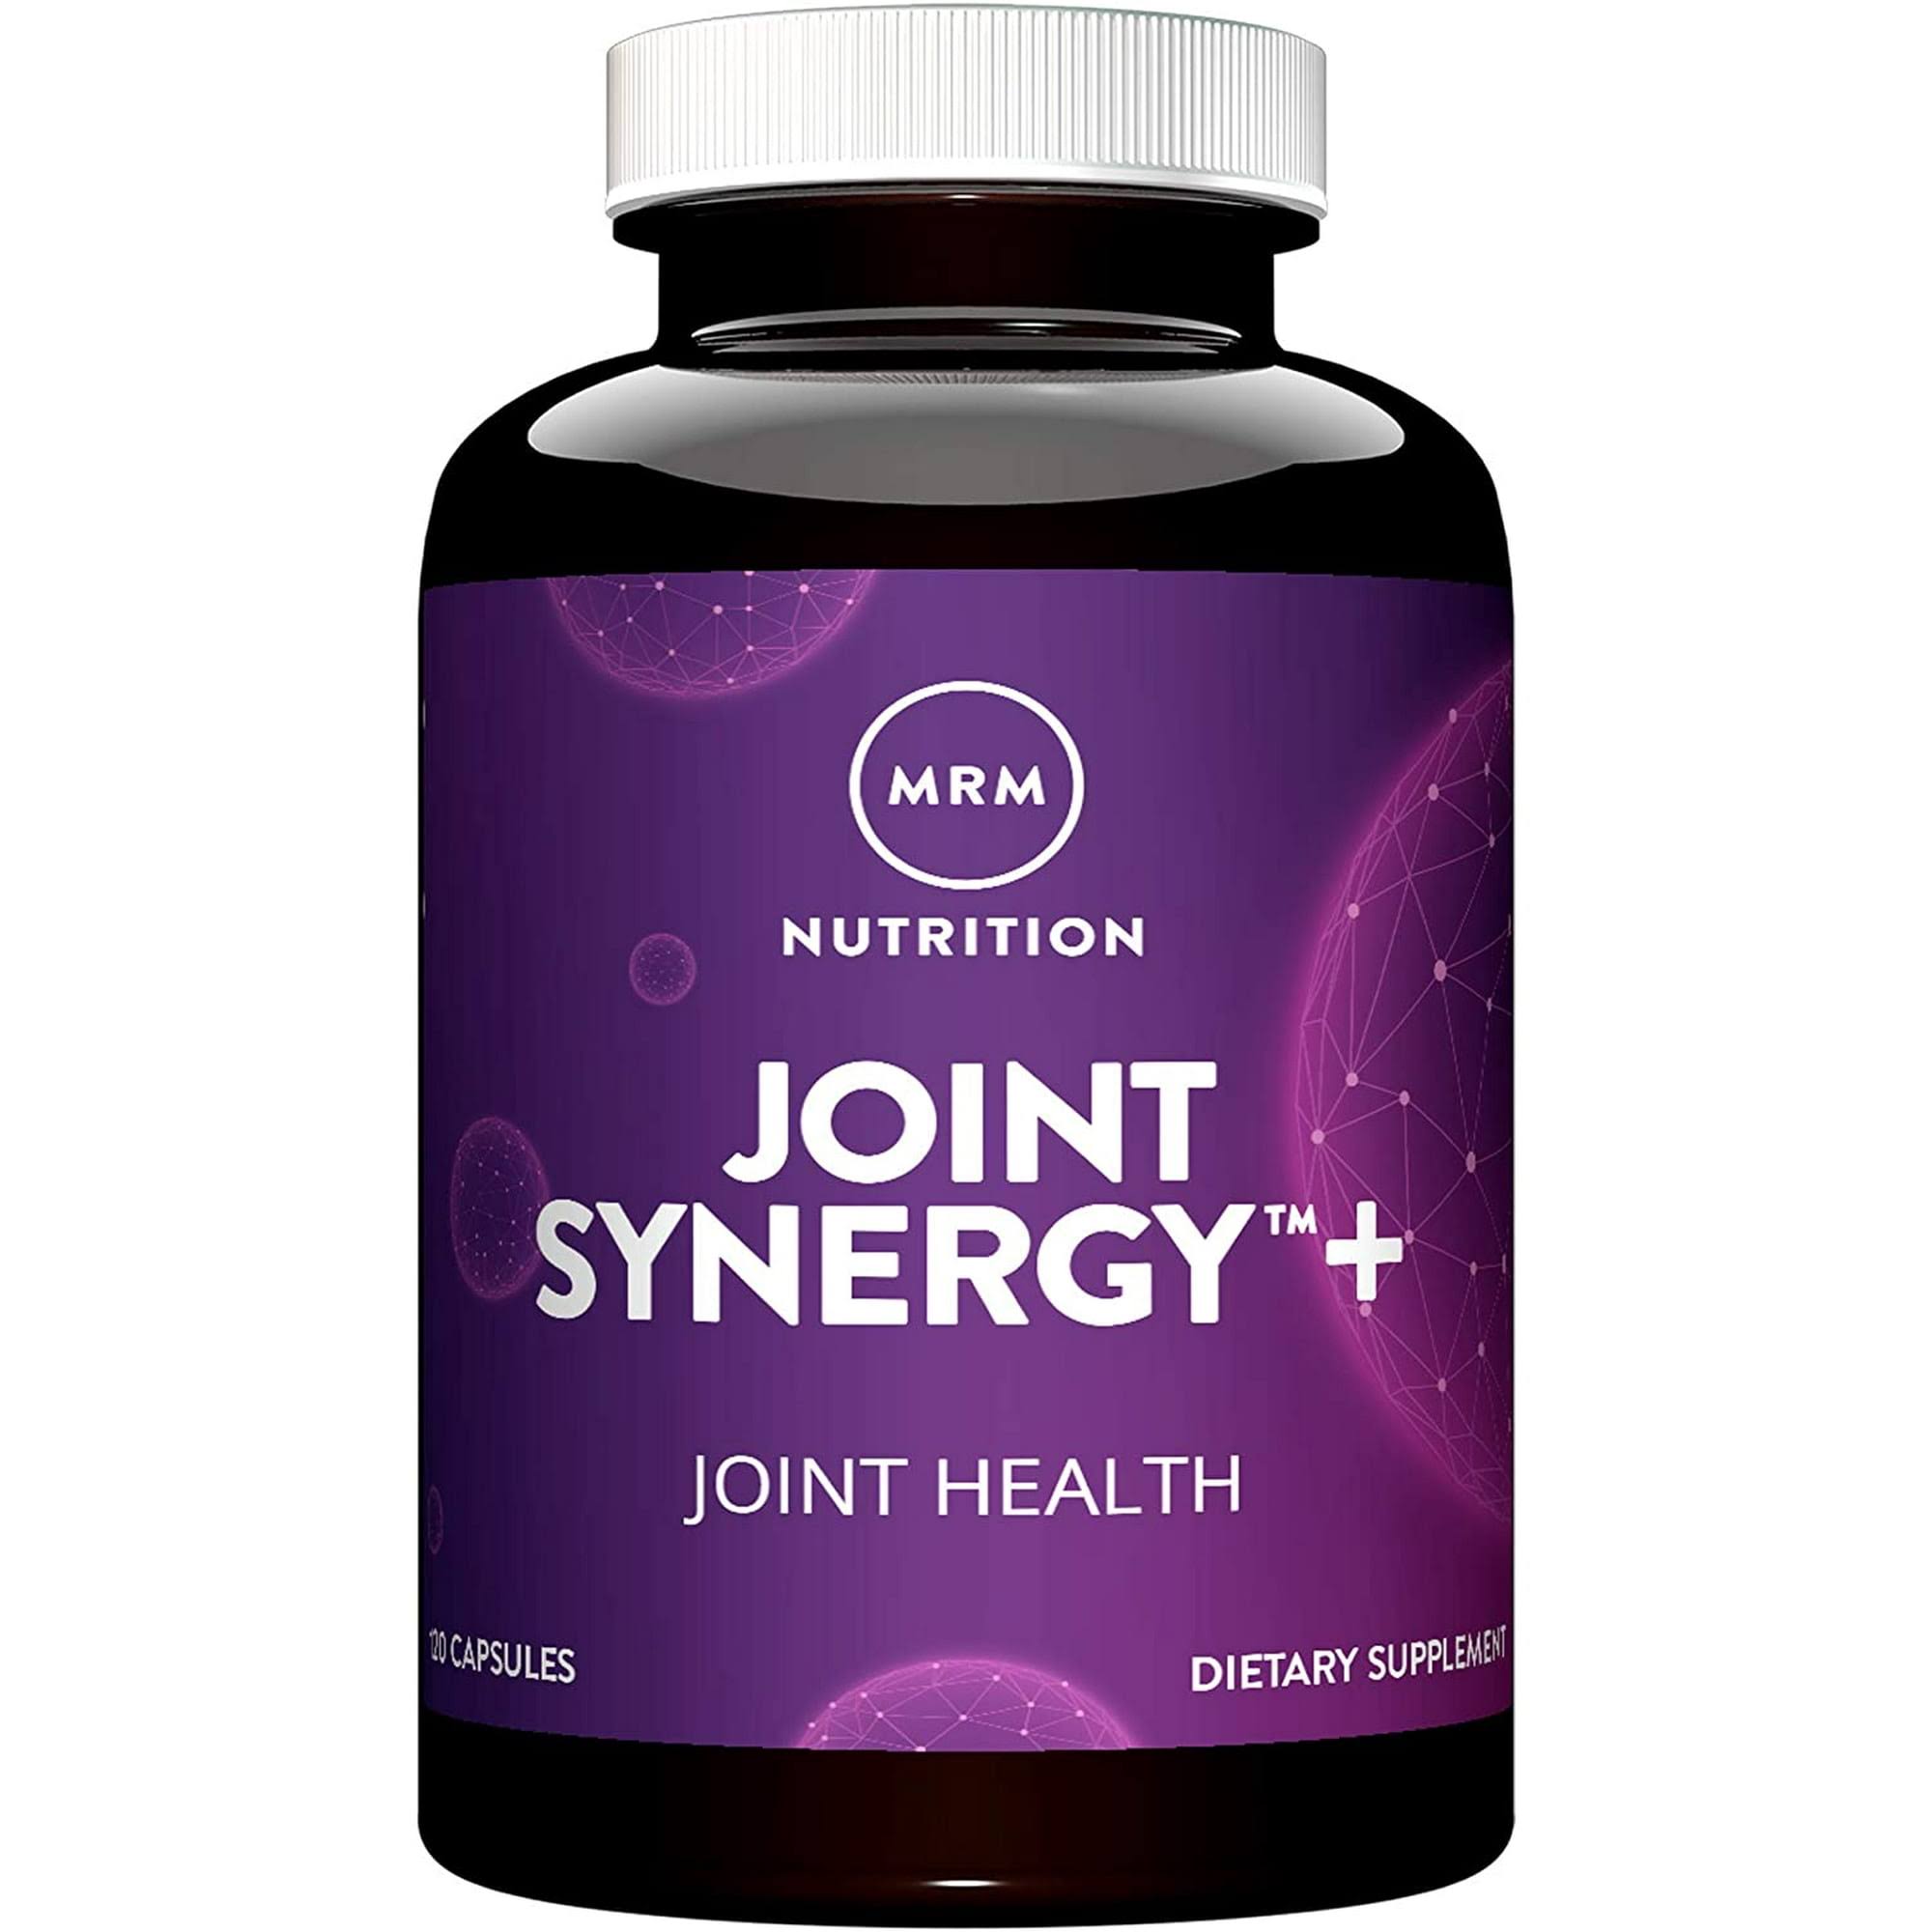 MRM Joint Synergy+ Dietary Supplement - 120 Capsules